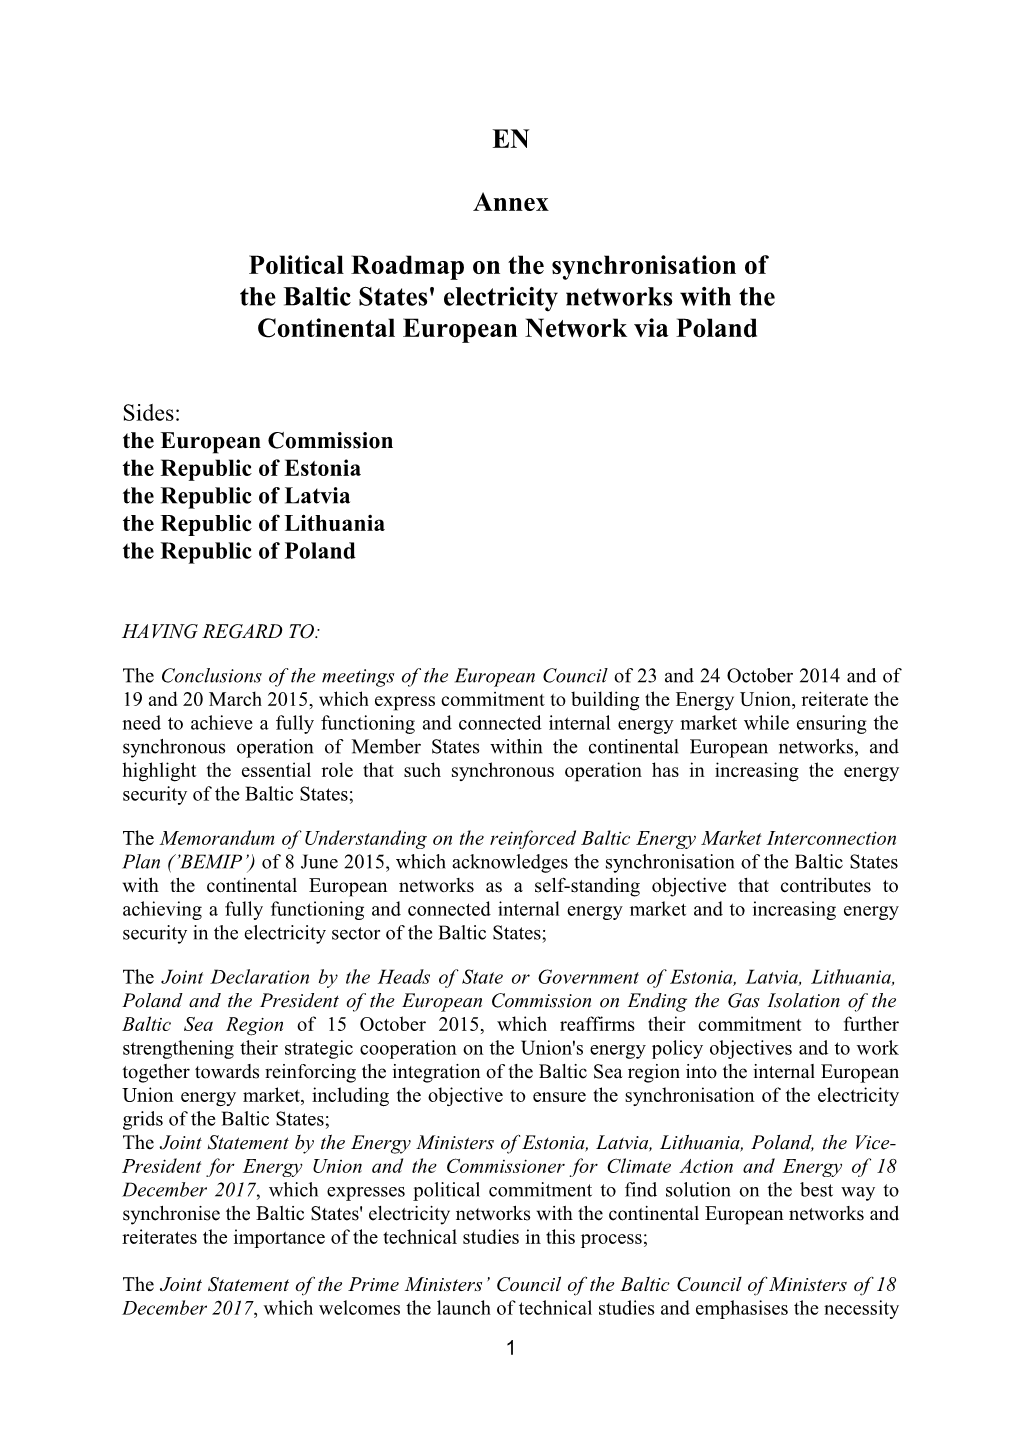 Political Roadmap on Thesynchronisation of the Baltic States' Electricity Networks With